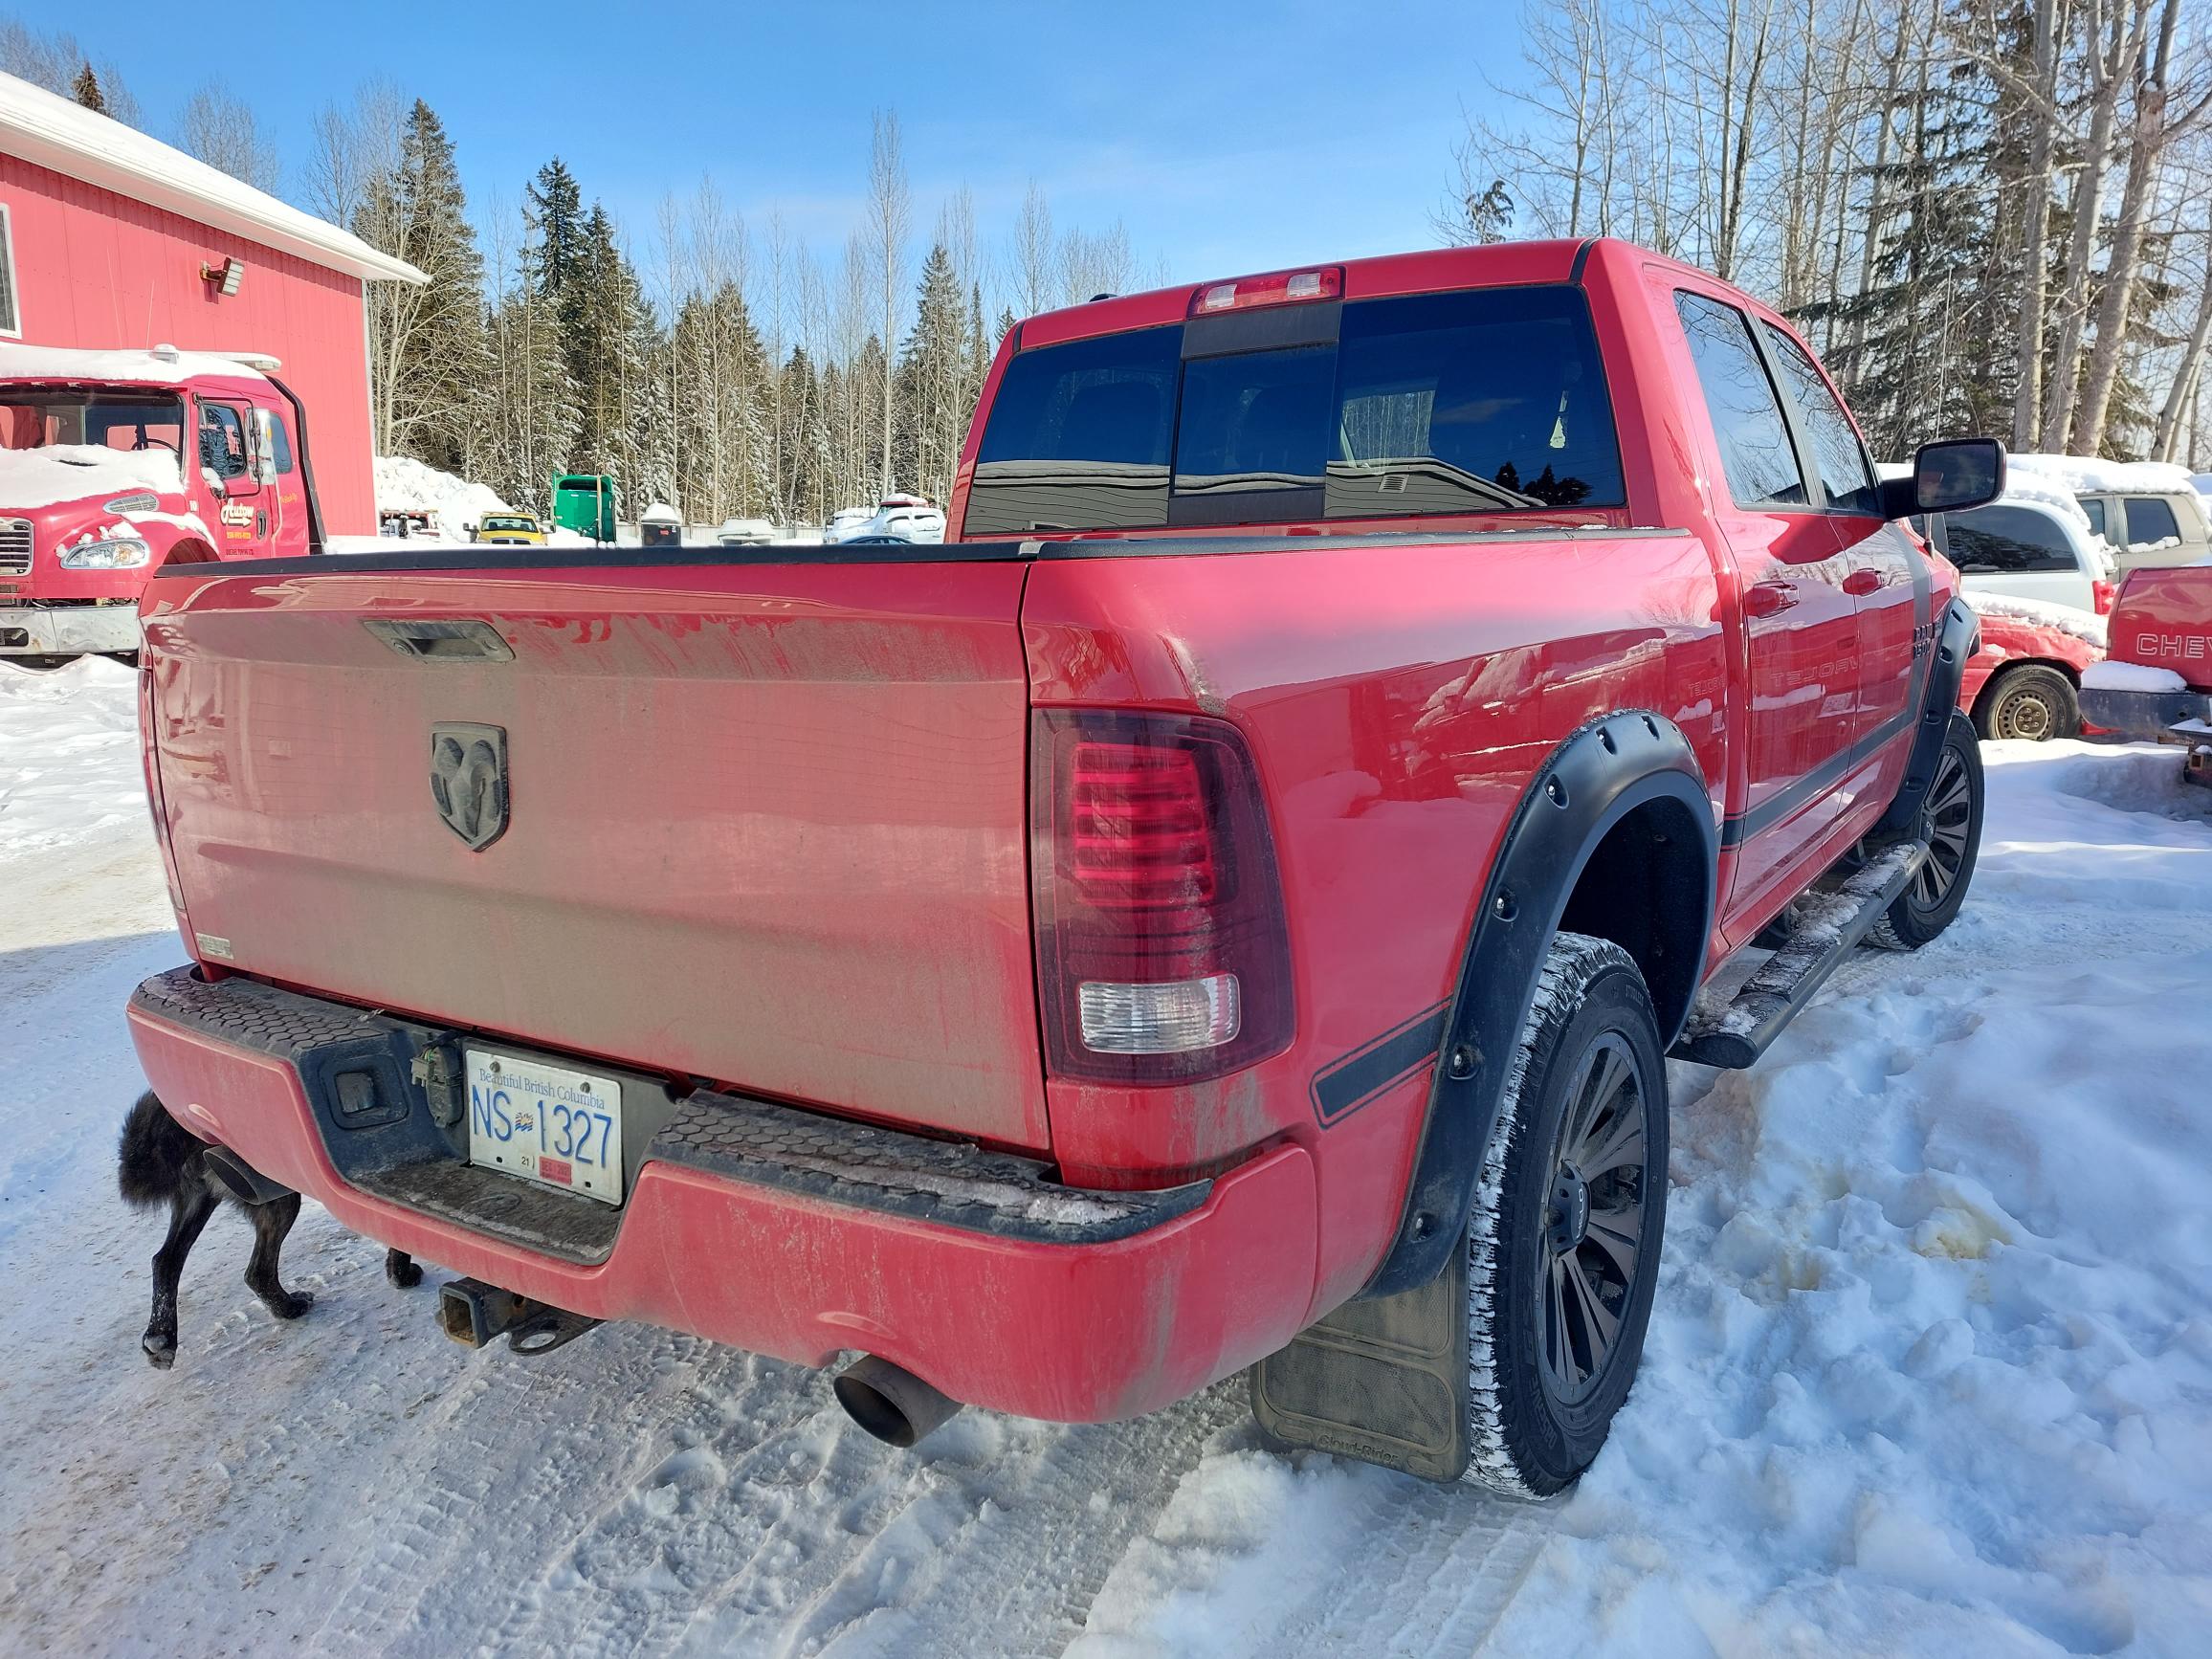 2016 Dodge Ram 1500 #B-PG-0741 Located in Prince George